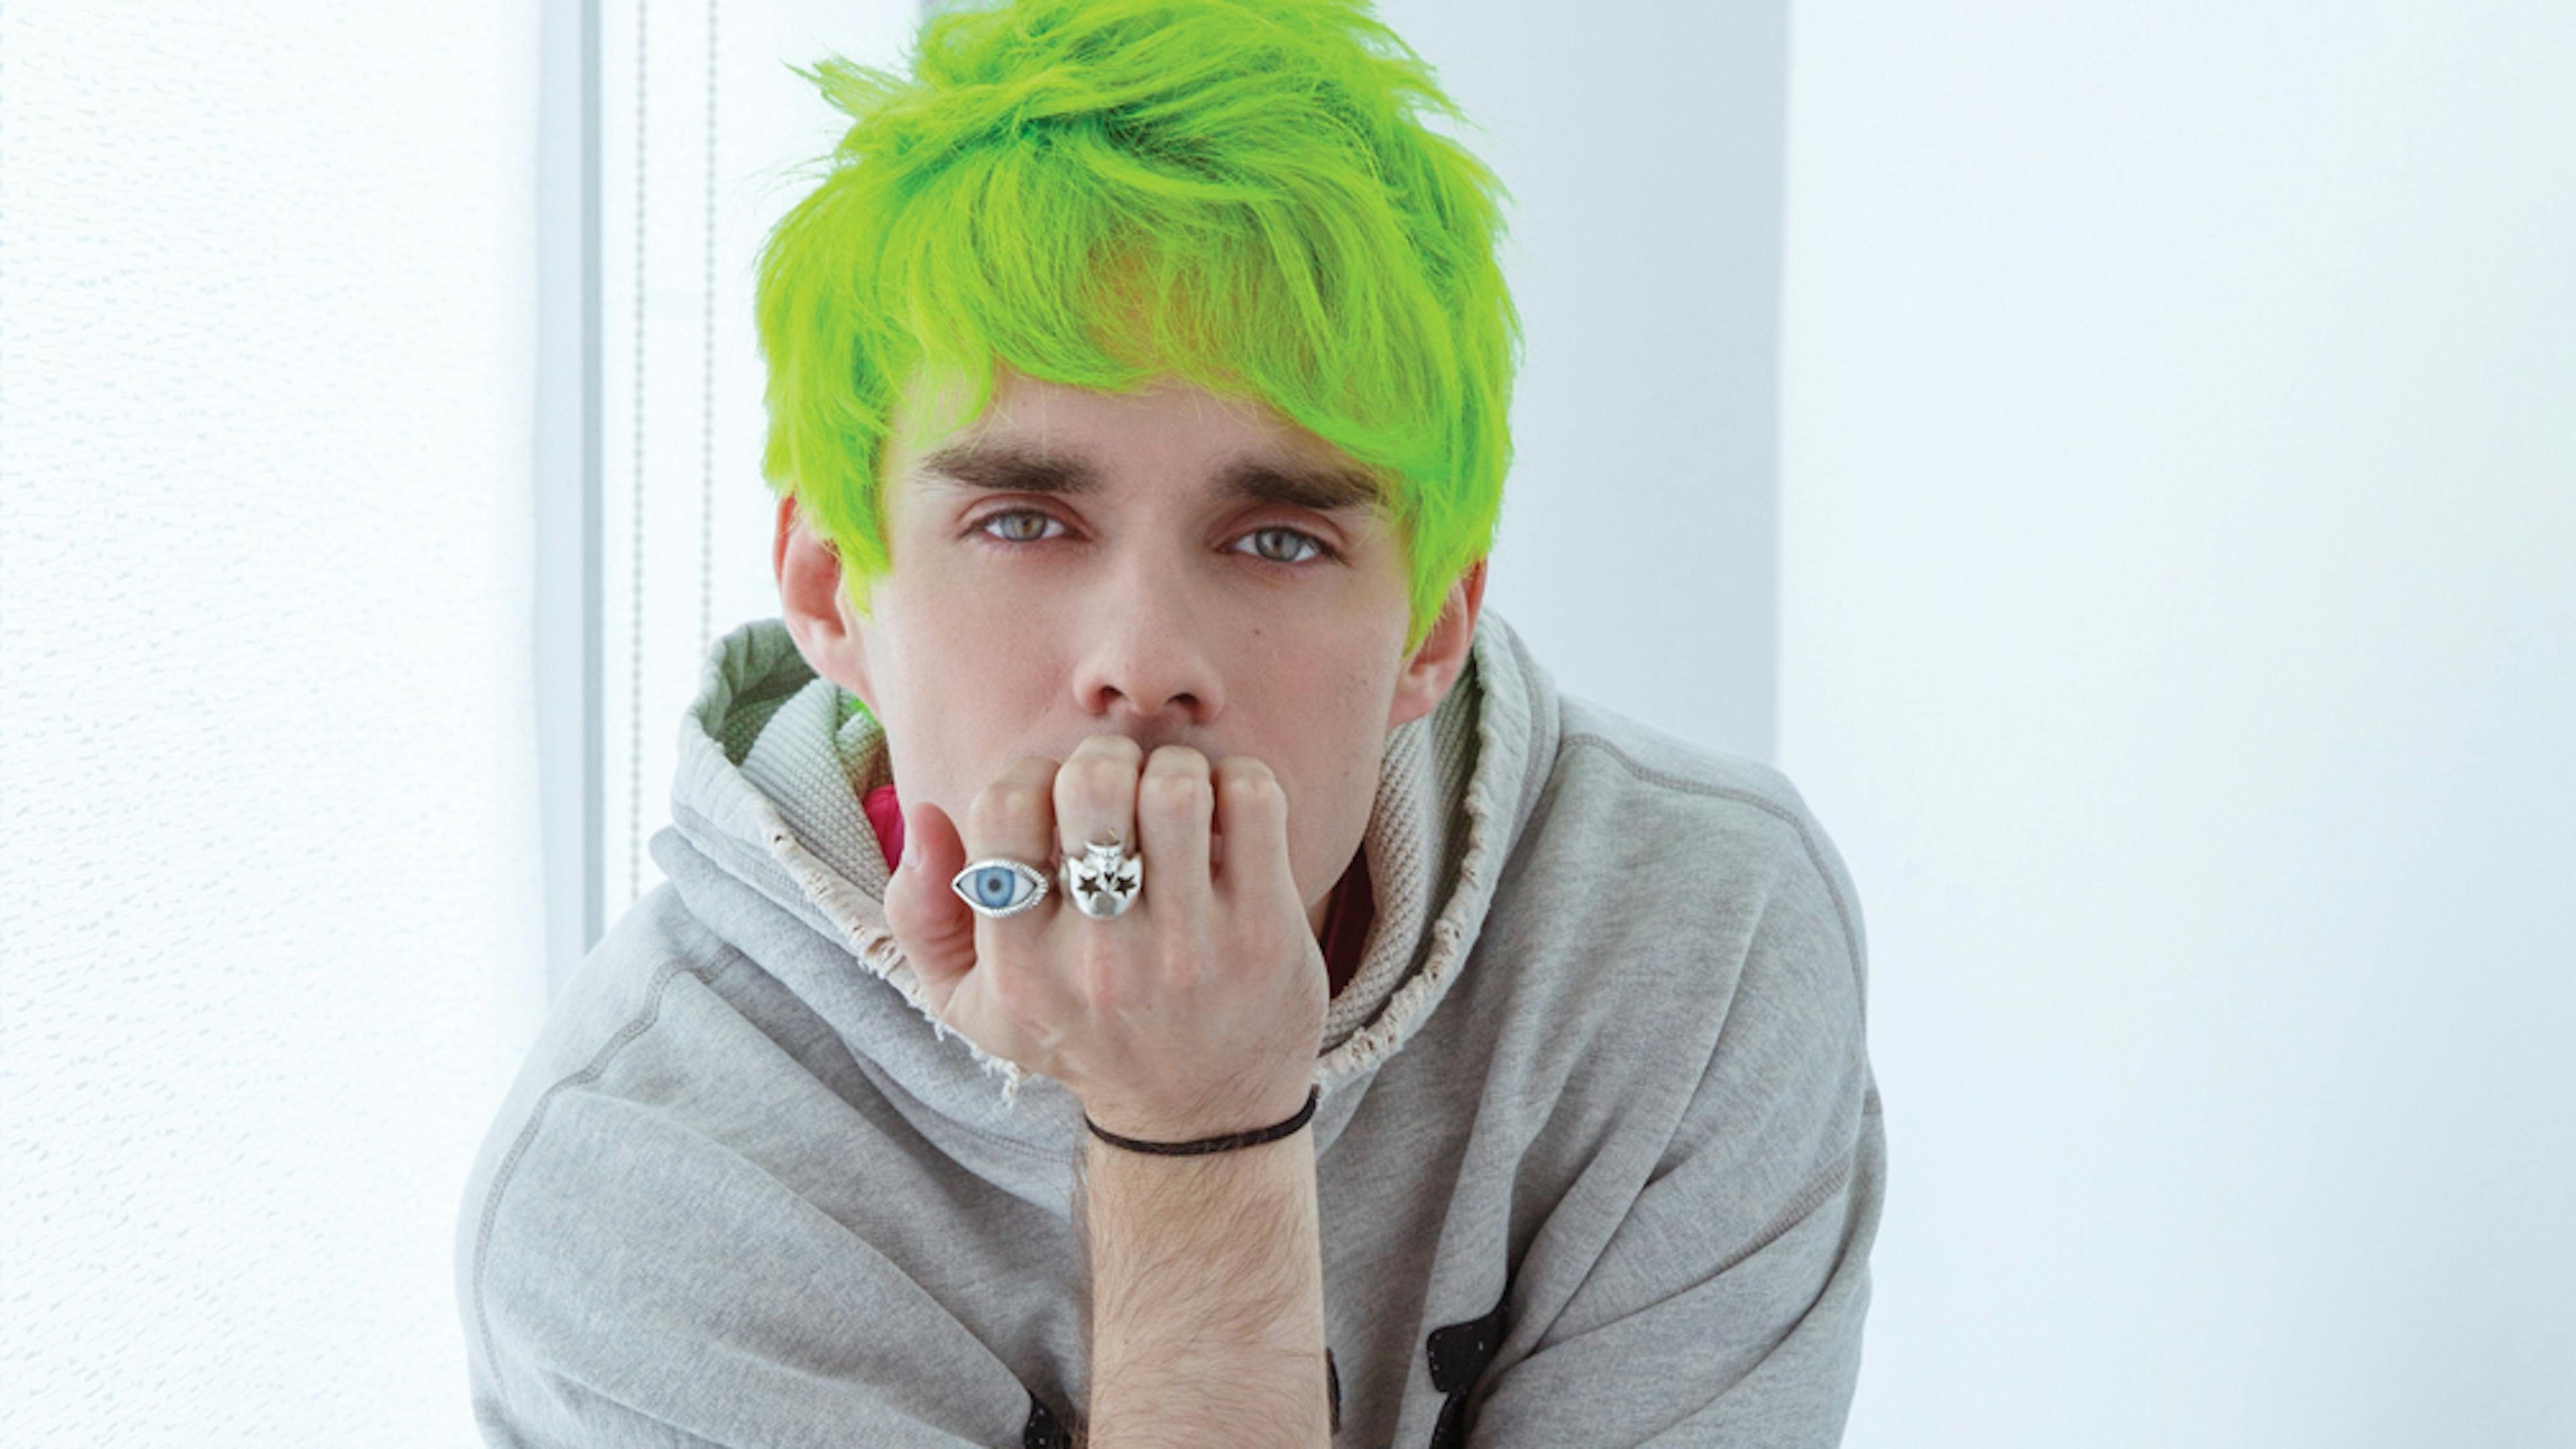 Waterparks' Awsten Knight: How I'm Surviving Self-Isolation